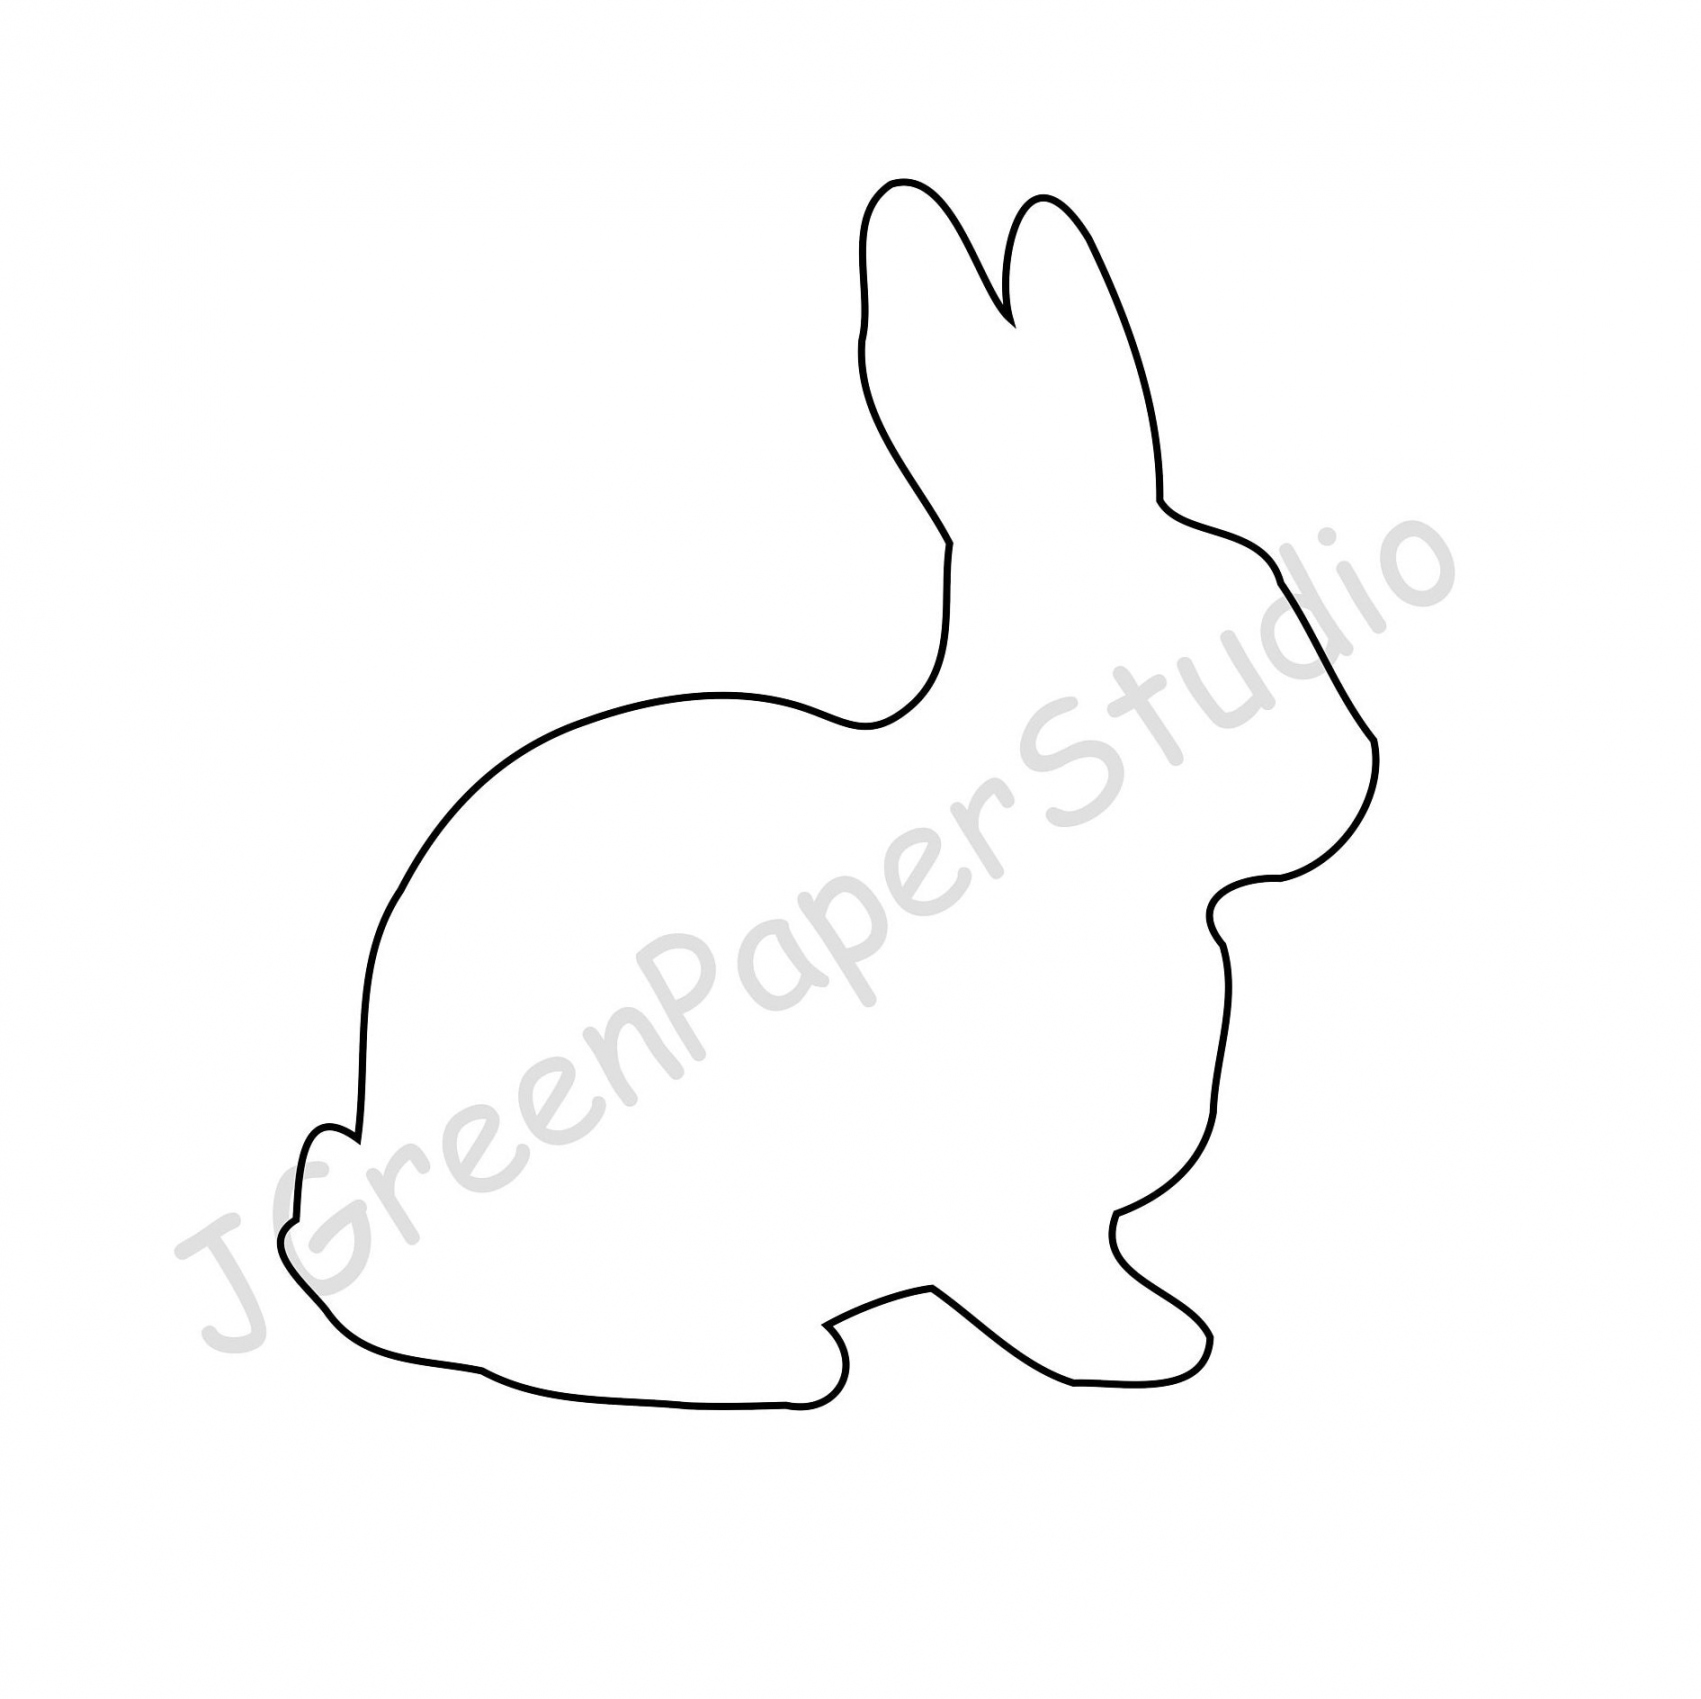 Printable Rabbit Template-PDF Digital Download Bunny Kids Coloring Page  Kids Crafts Stencil  inch Easter Bunny DIY Craft - FREE Printables - Rabbit Template Printable